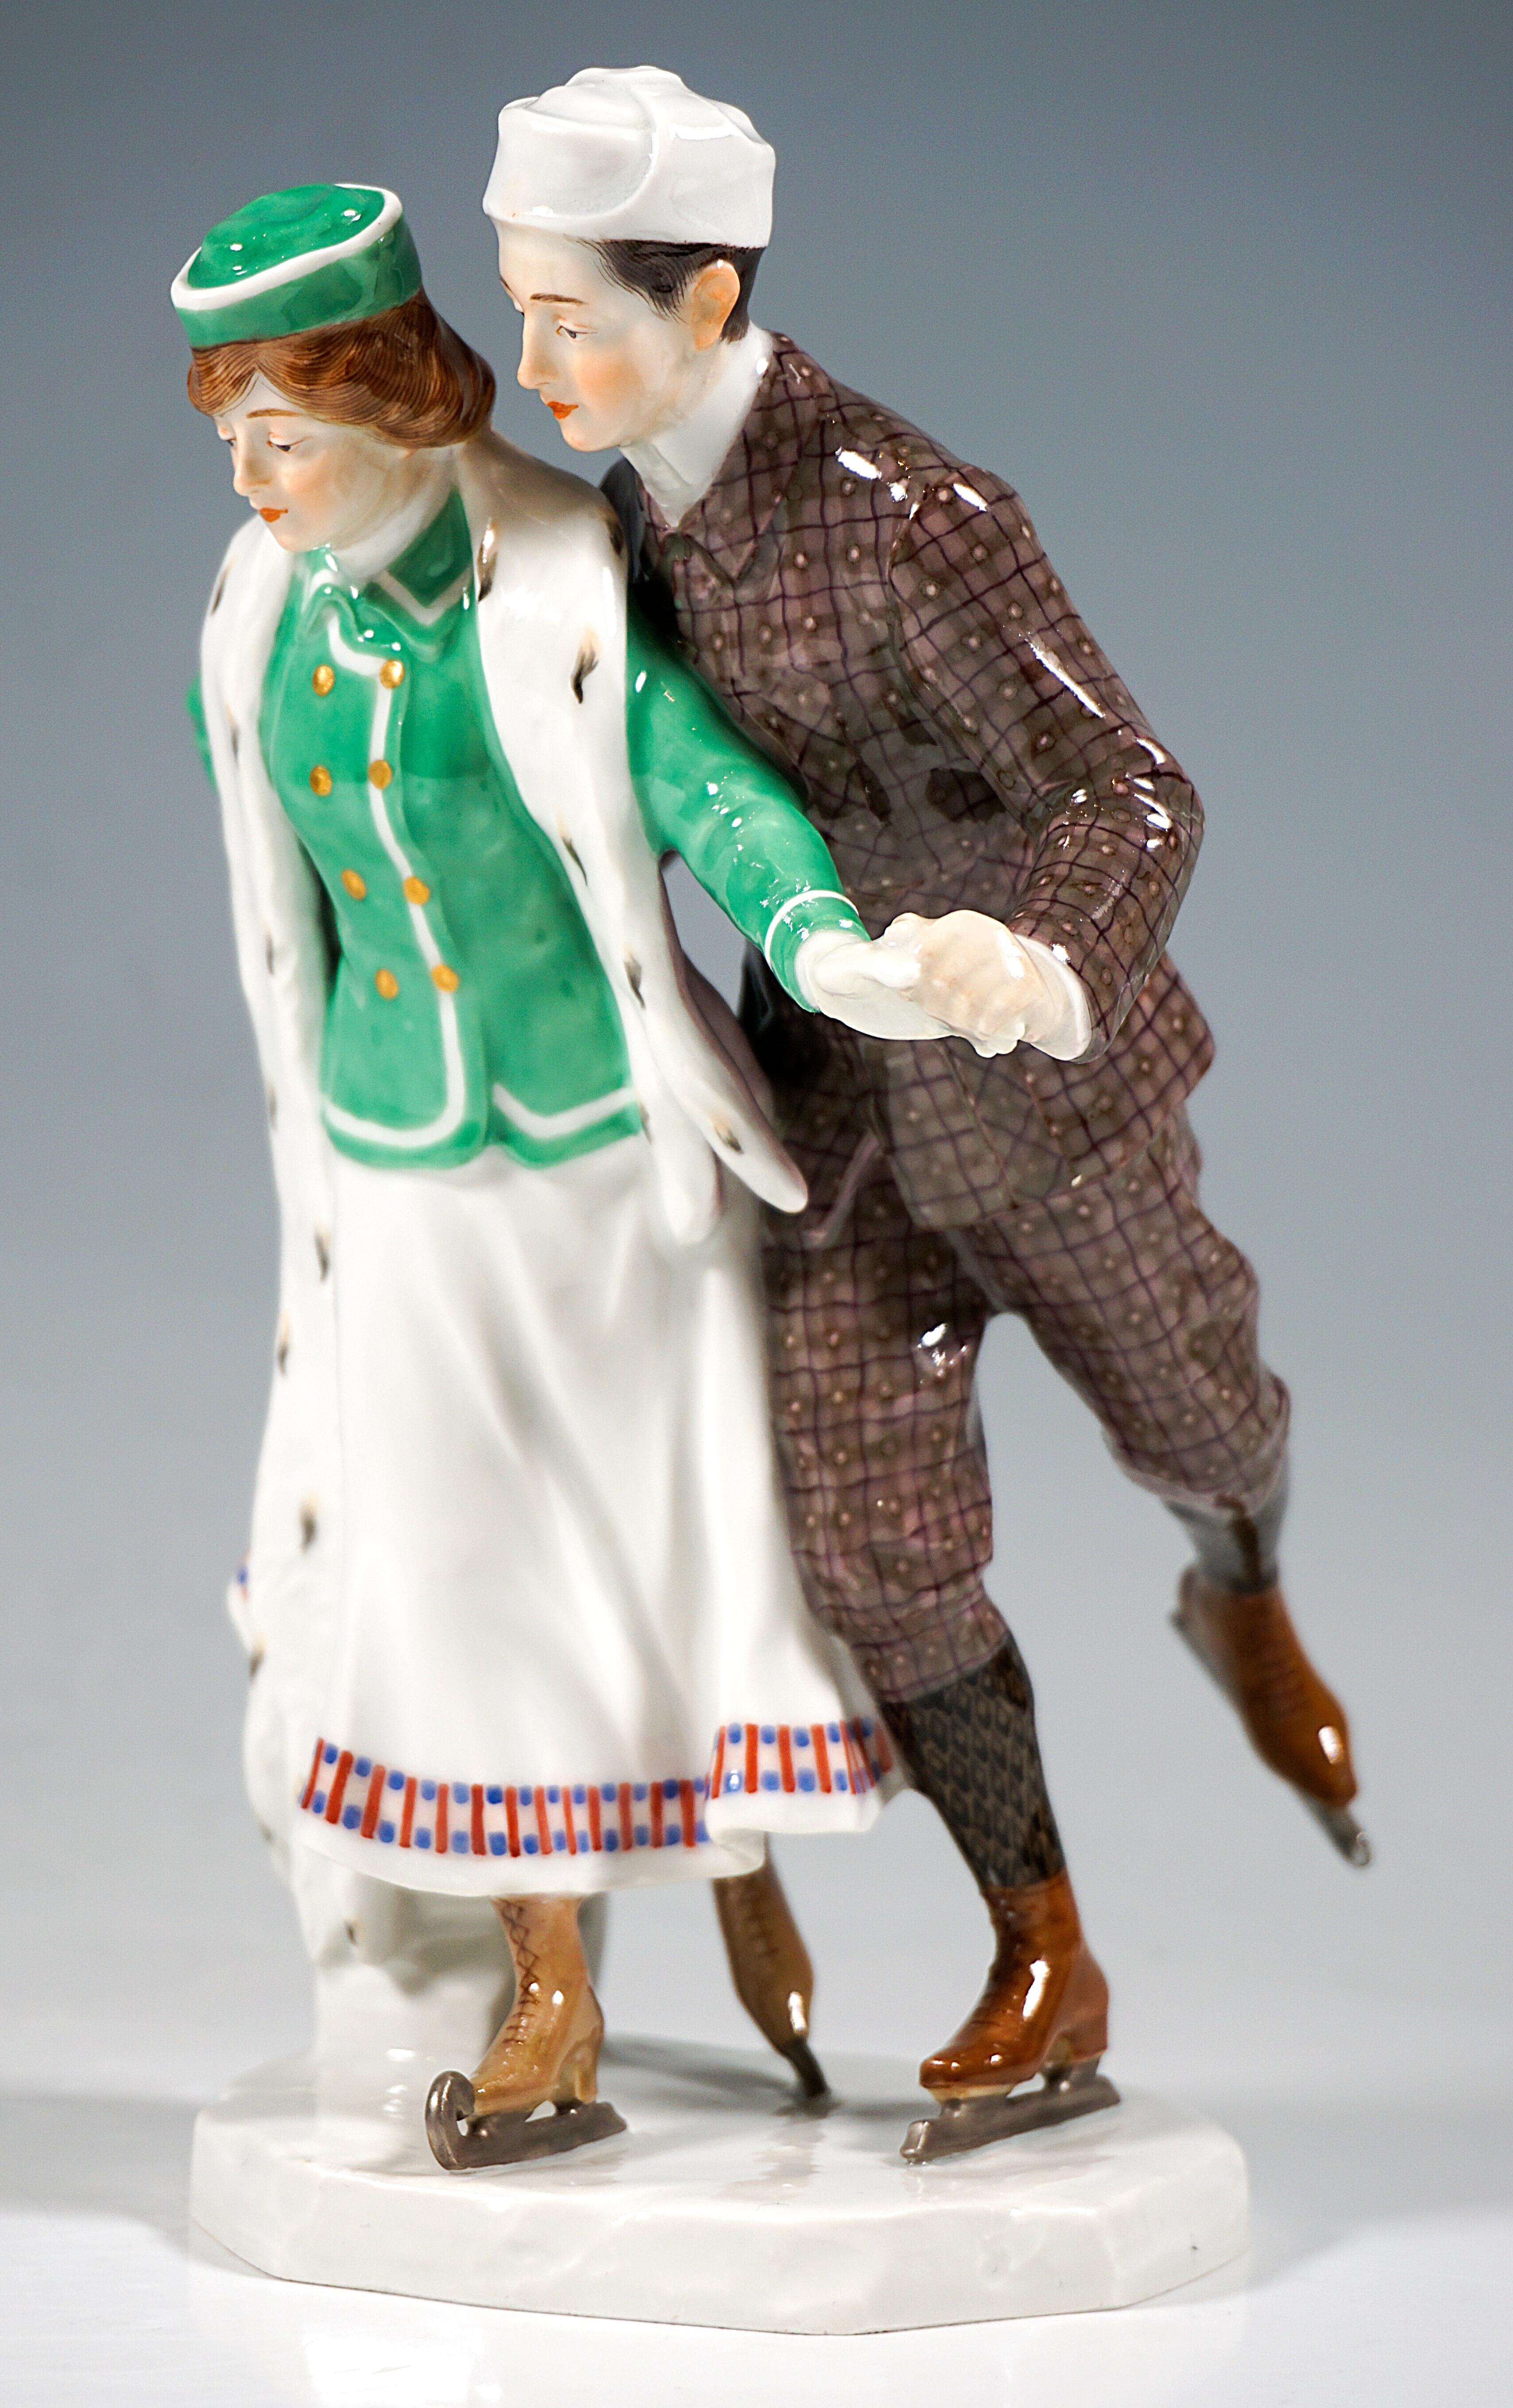 Early 20th Century Art Nouveau Figure Group 'Ice-Scater', by Alfred Koenig, Meissen Germany, 1910